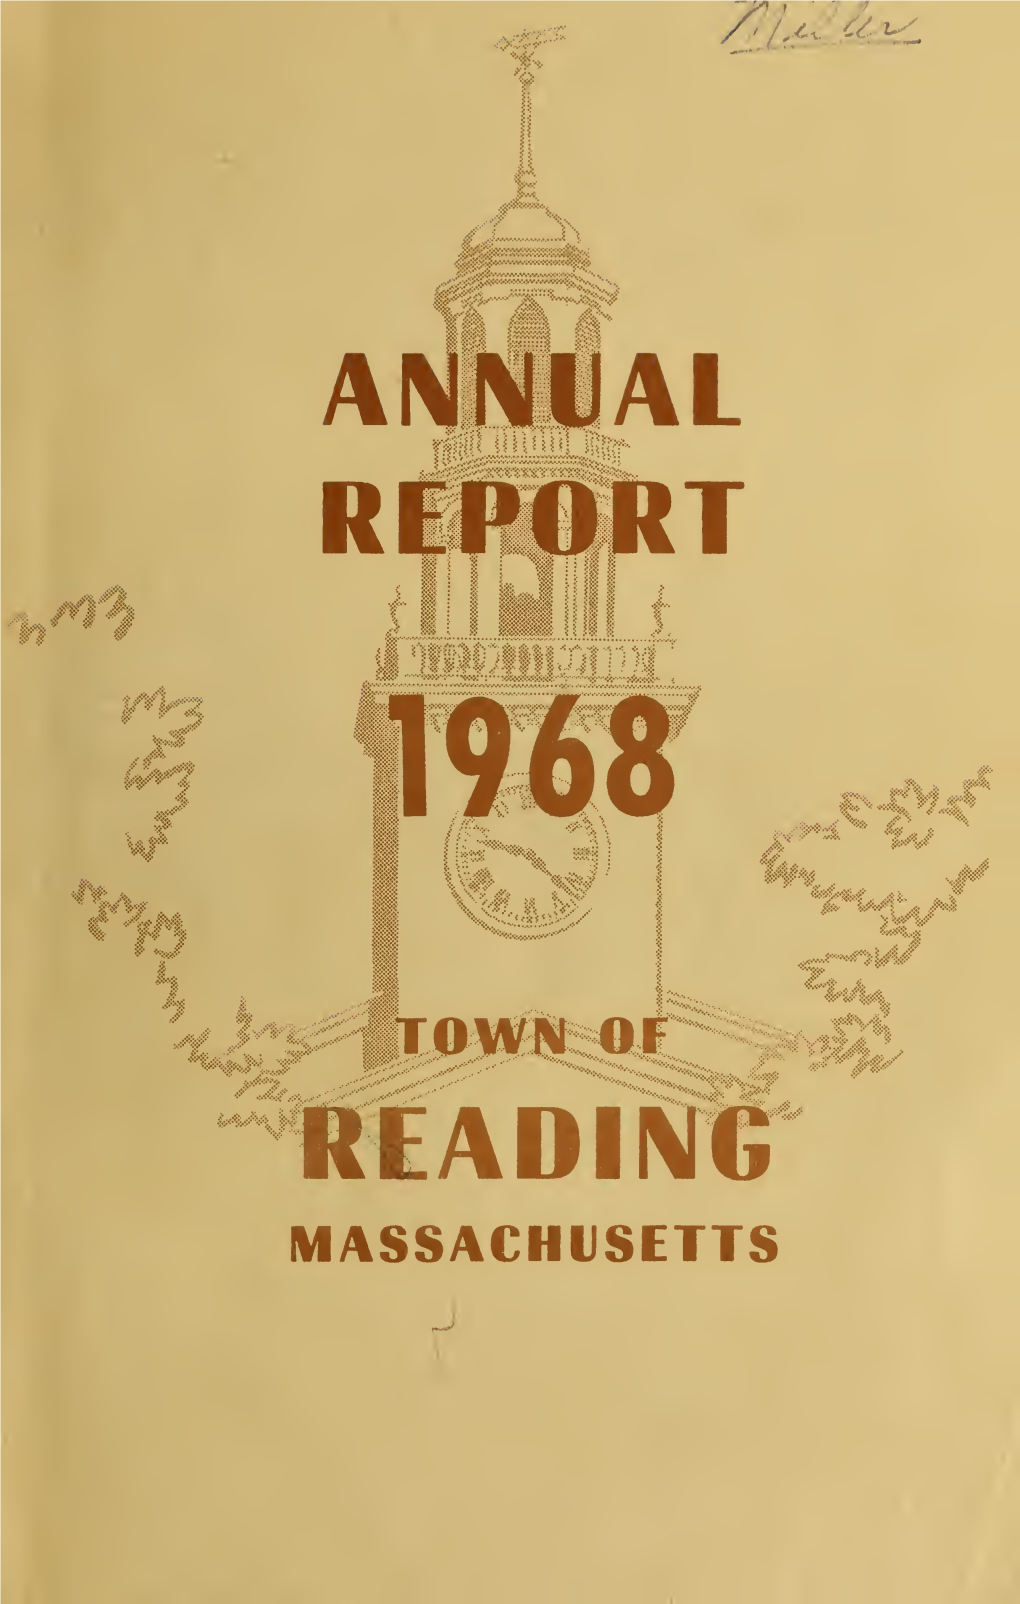 Town of Reading Massachusetts Annual Report